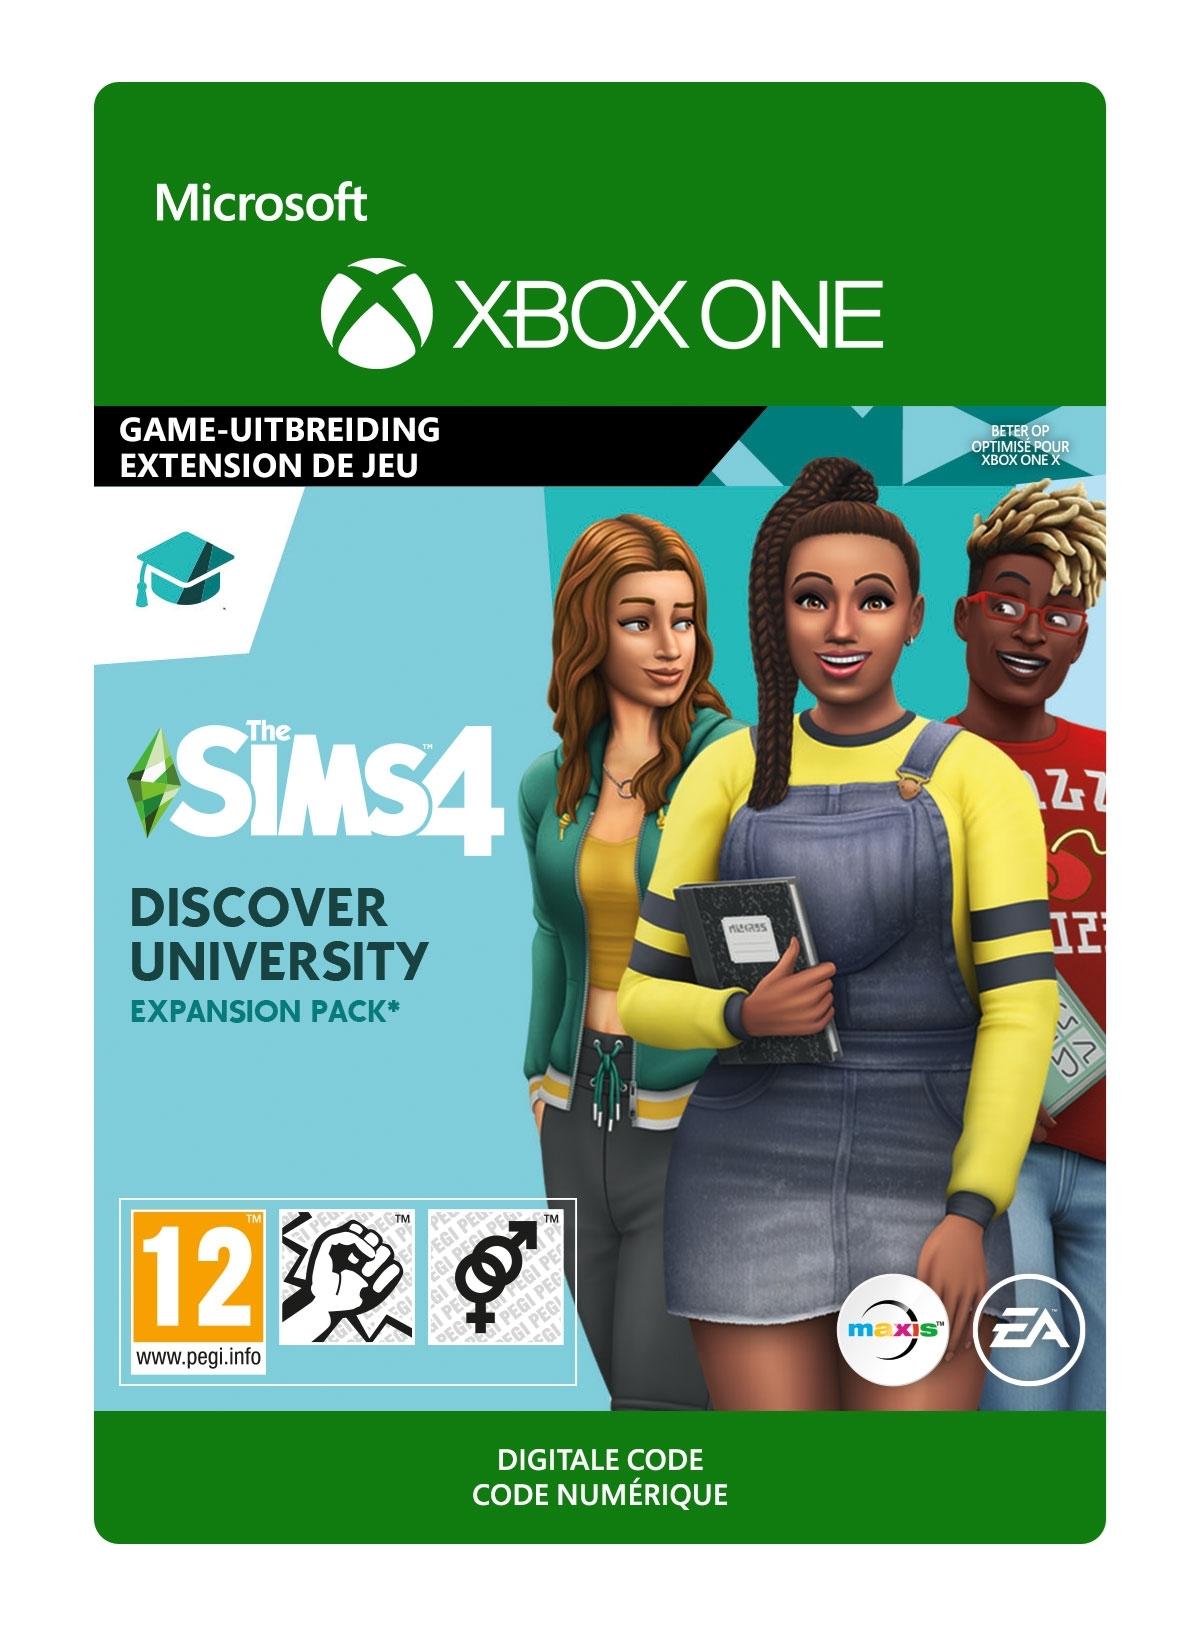 The Sims 4: Discovery University (EP08) - Xbox One - Add-on | 7D4-00516 (2993f6cb-9099-f14c-ae3c-c98289dbb18d)